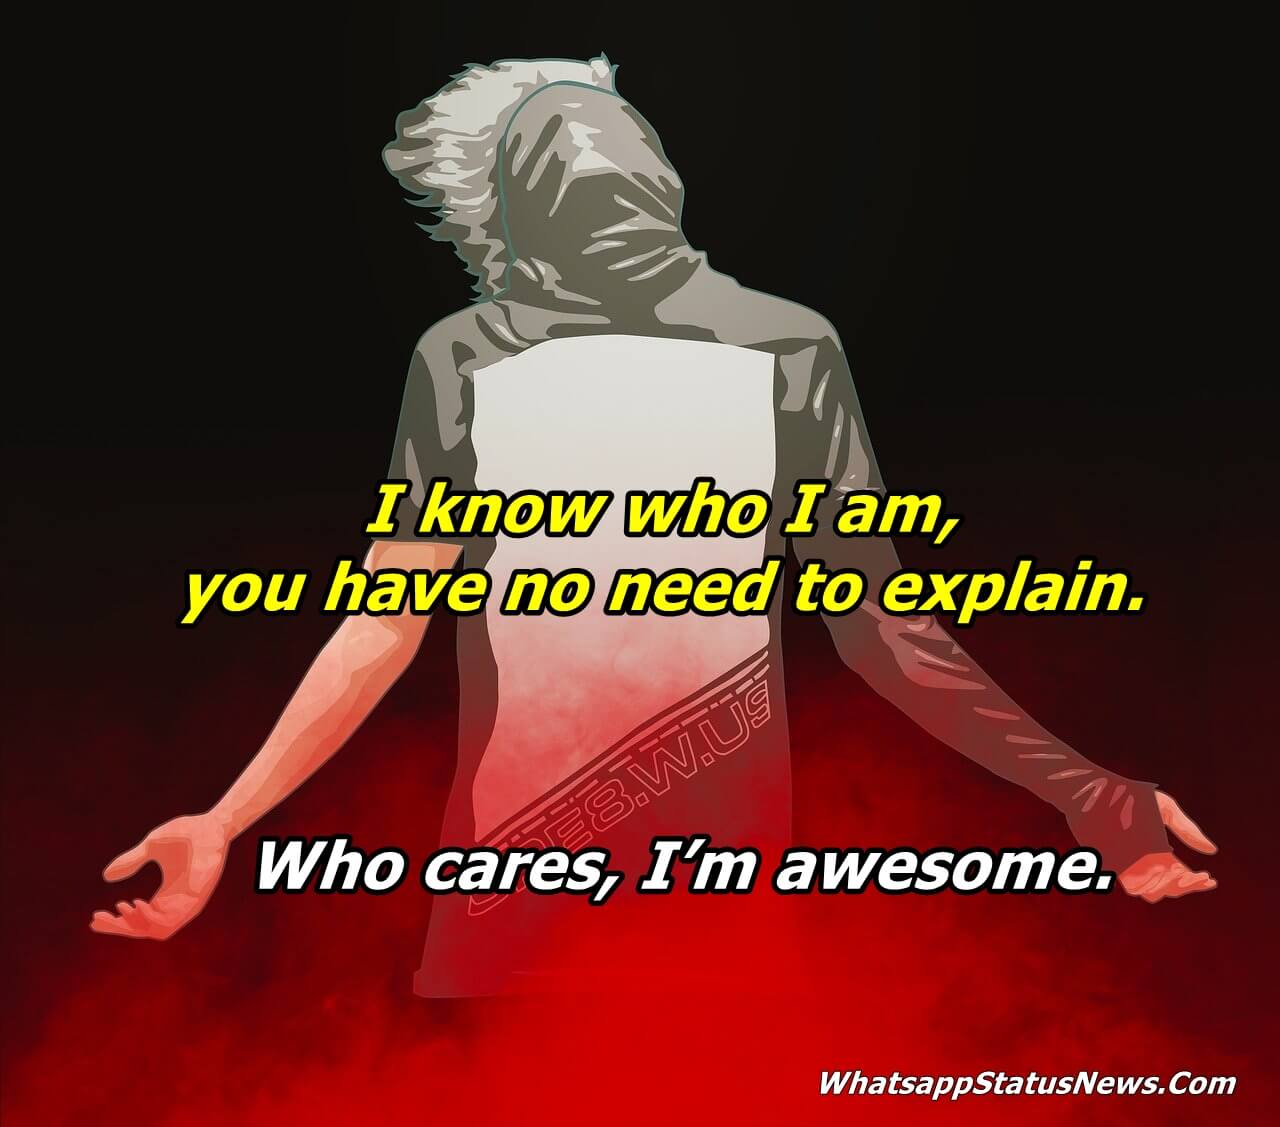 Who cares, I’m awesome.